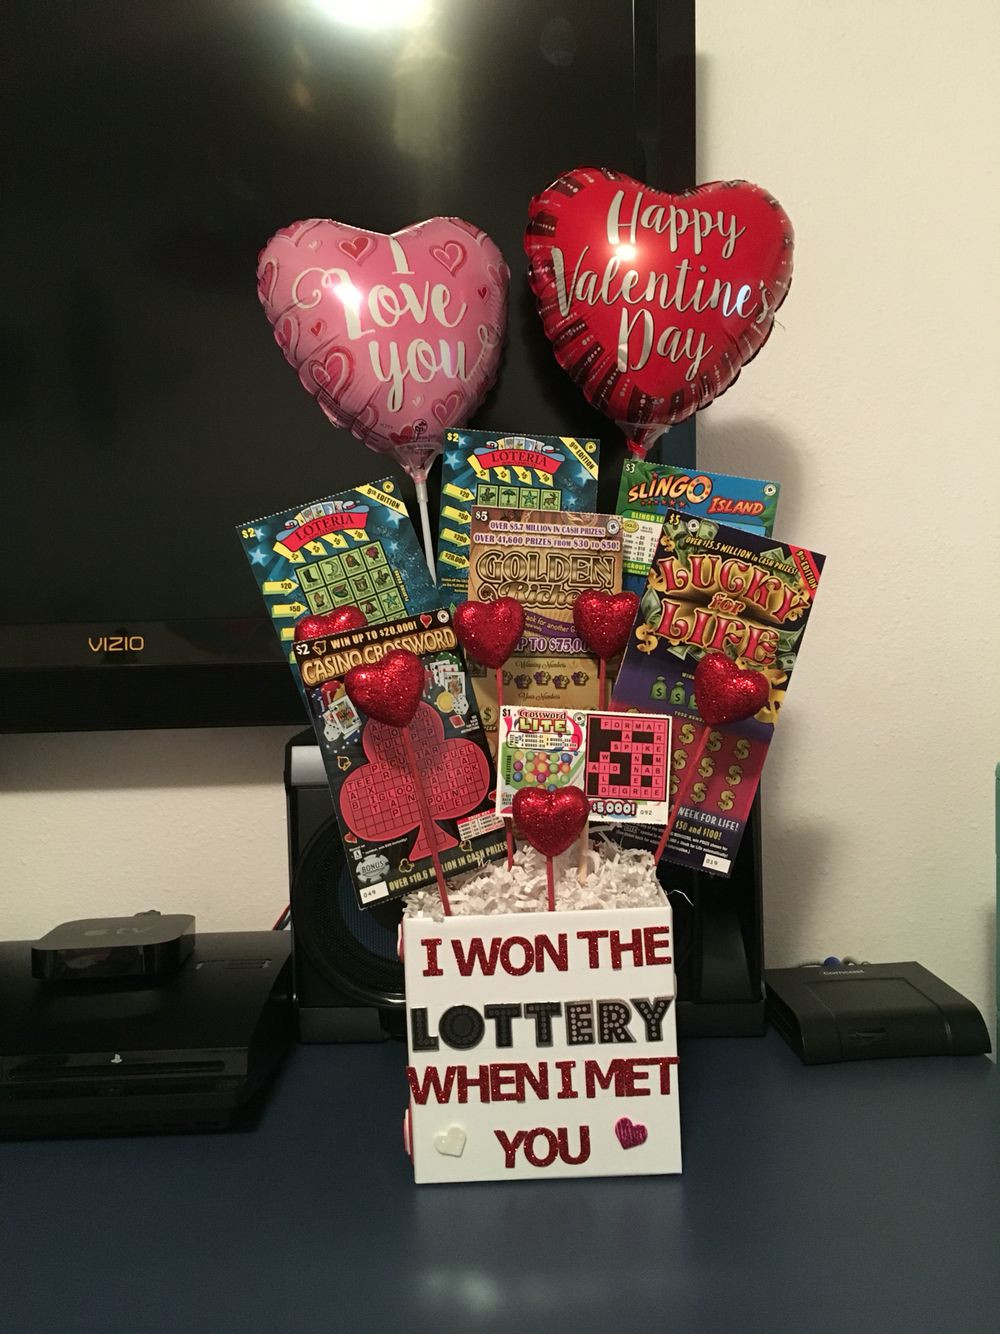 Valentines Day Gifts For Him Pinterest
 Pin on Cute